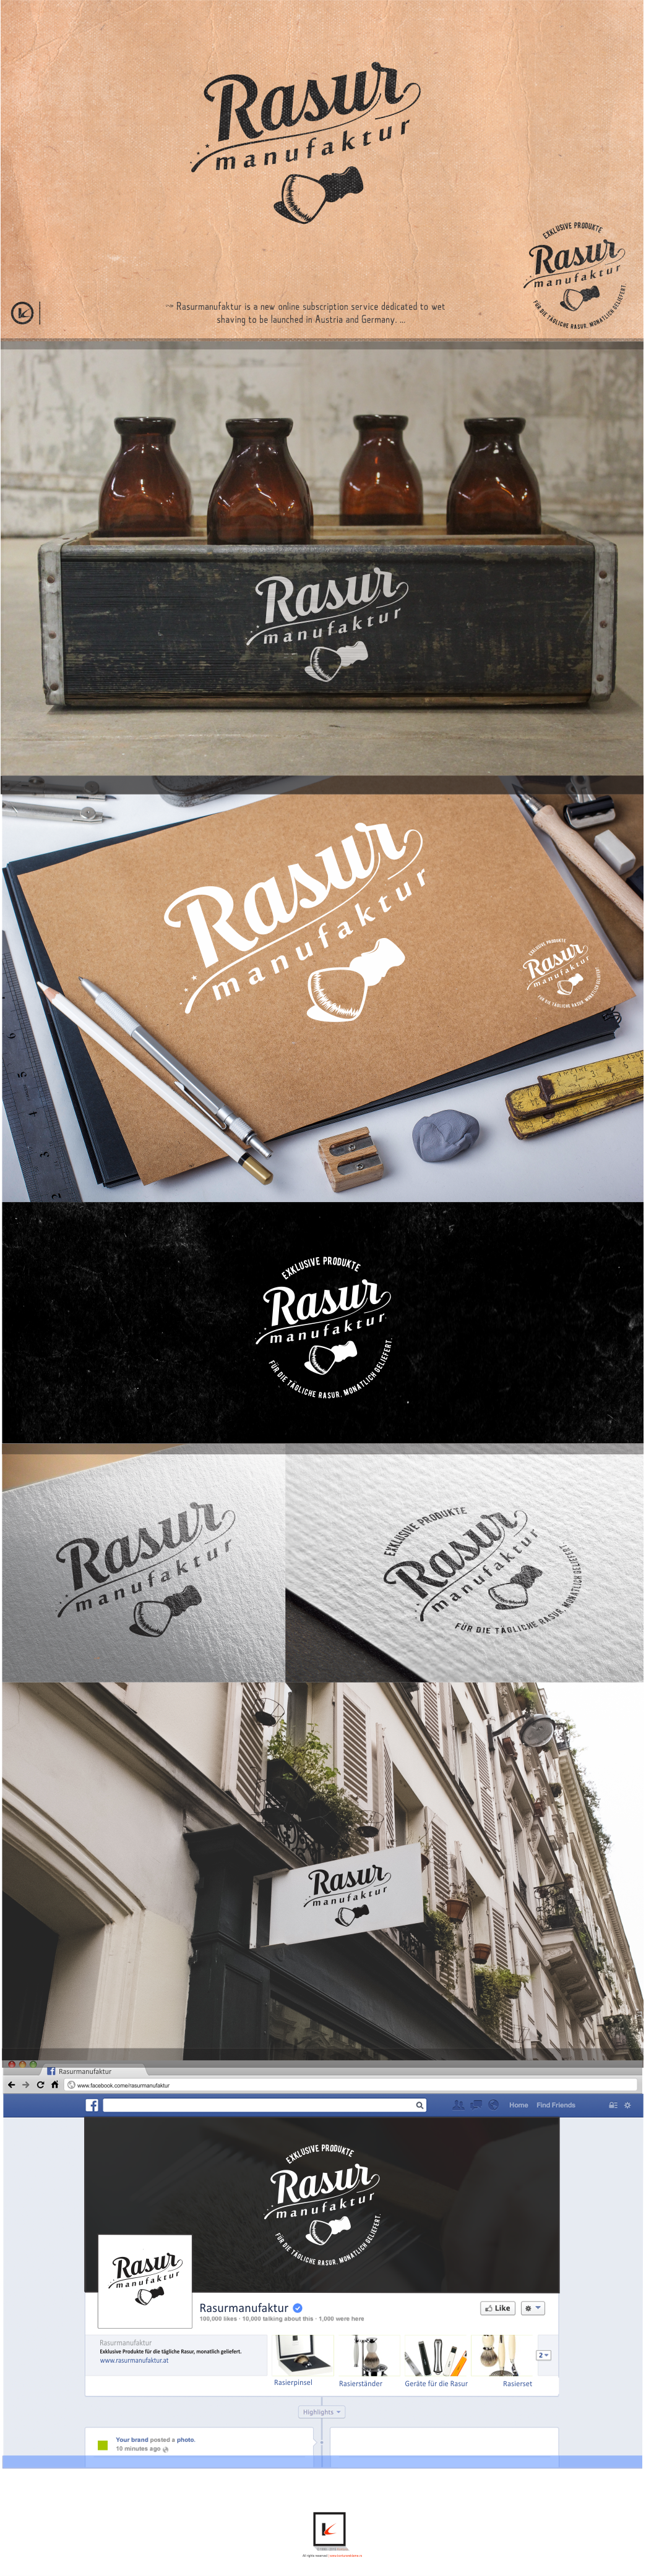 The winning project - Rasurmanufaktur - Exclusive goods for daily shaving delivered monthly!